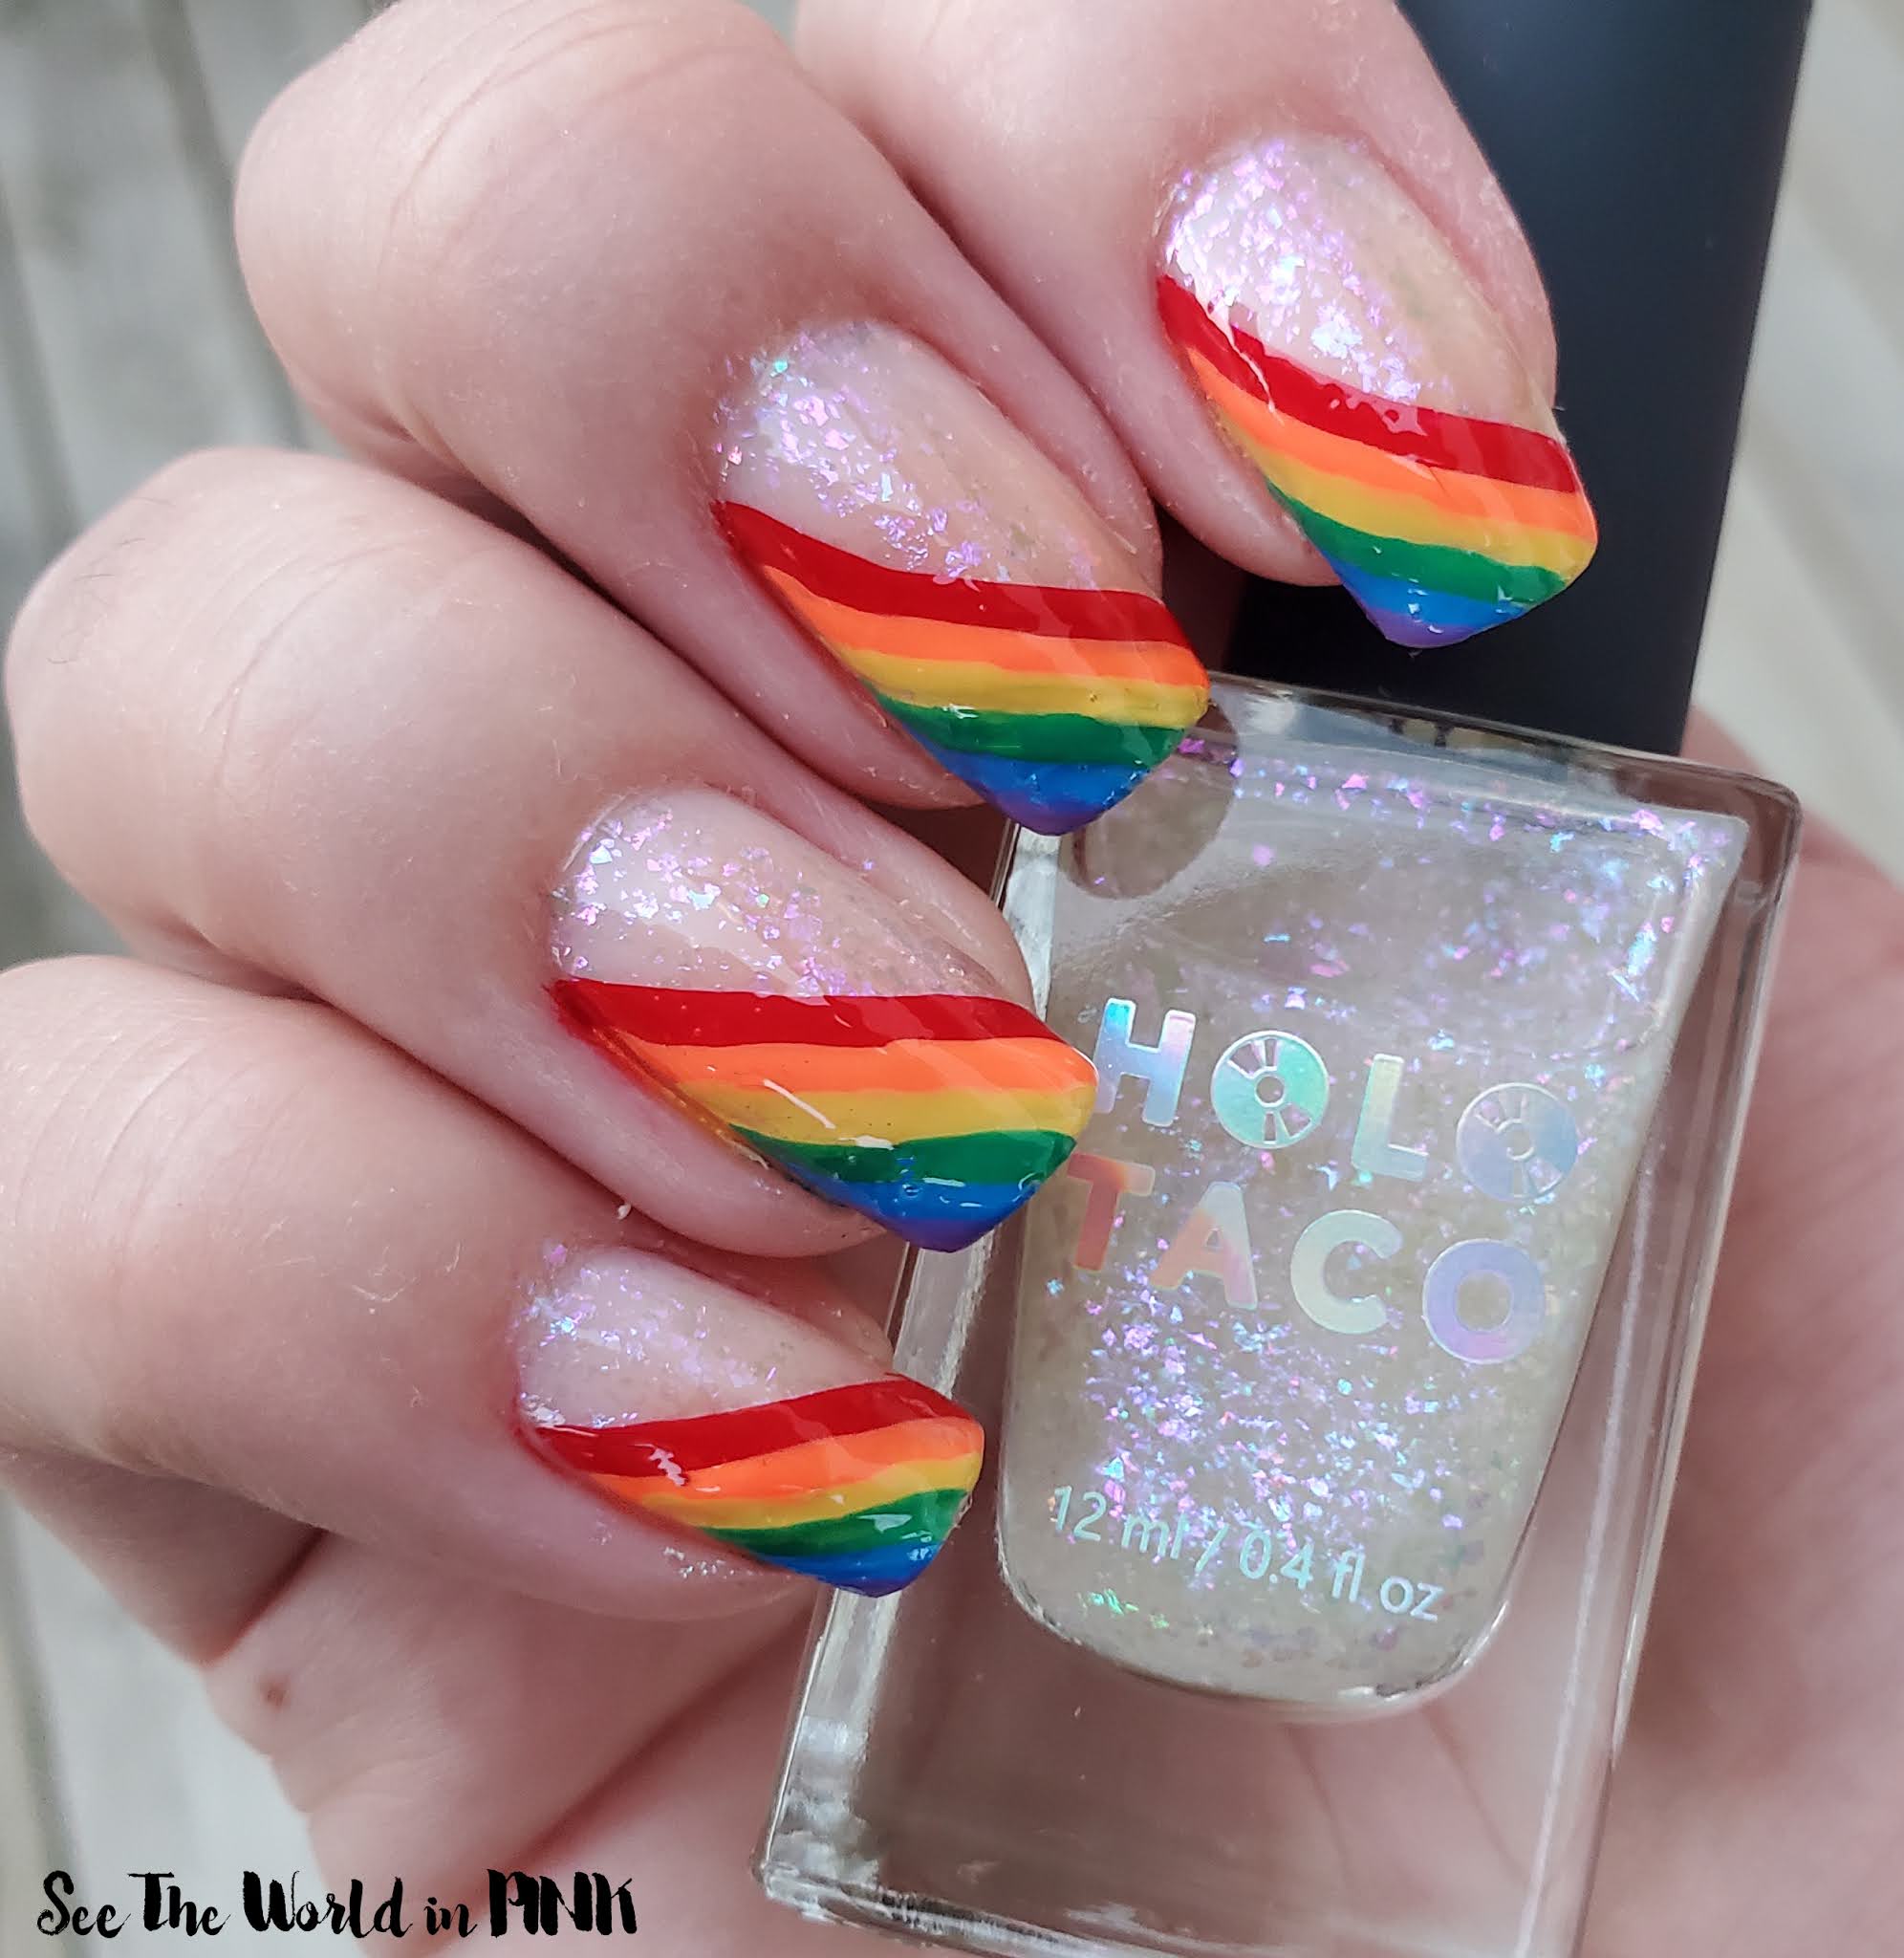 Manicure Monday - Pride Rainbow and Holographic Nails